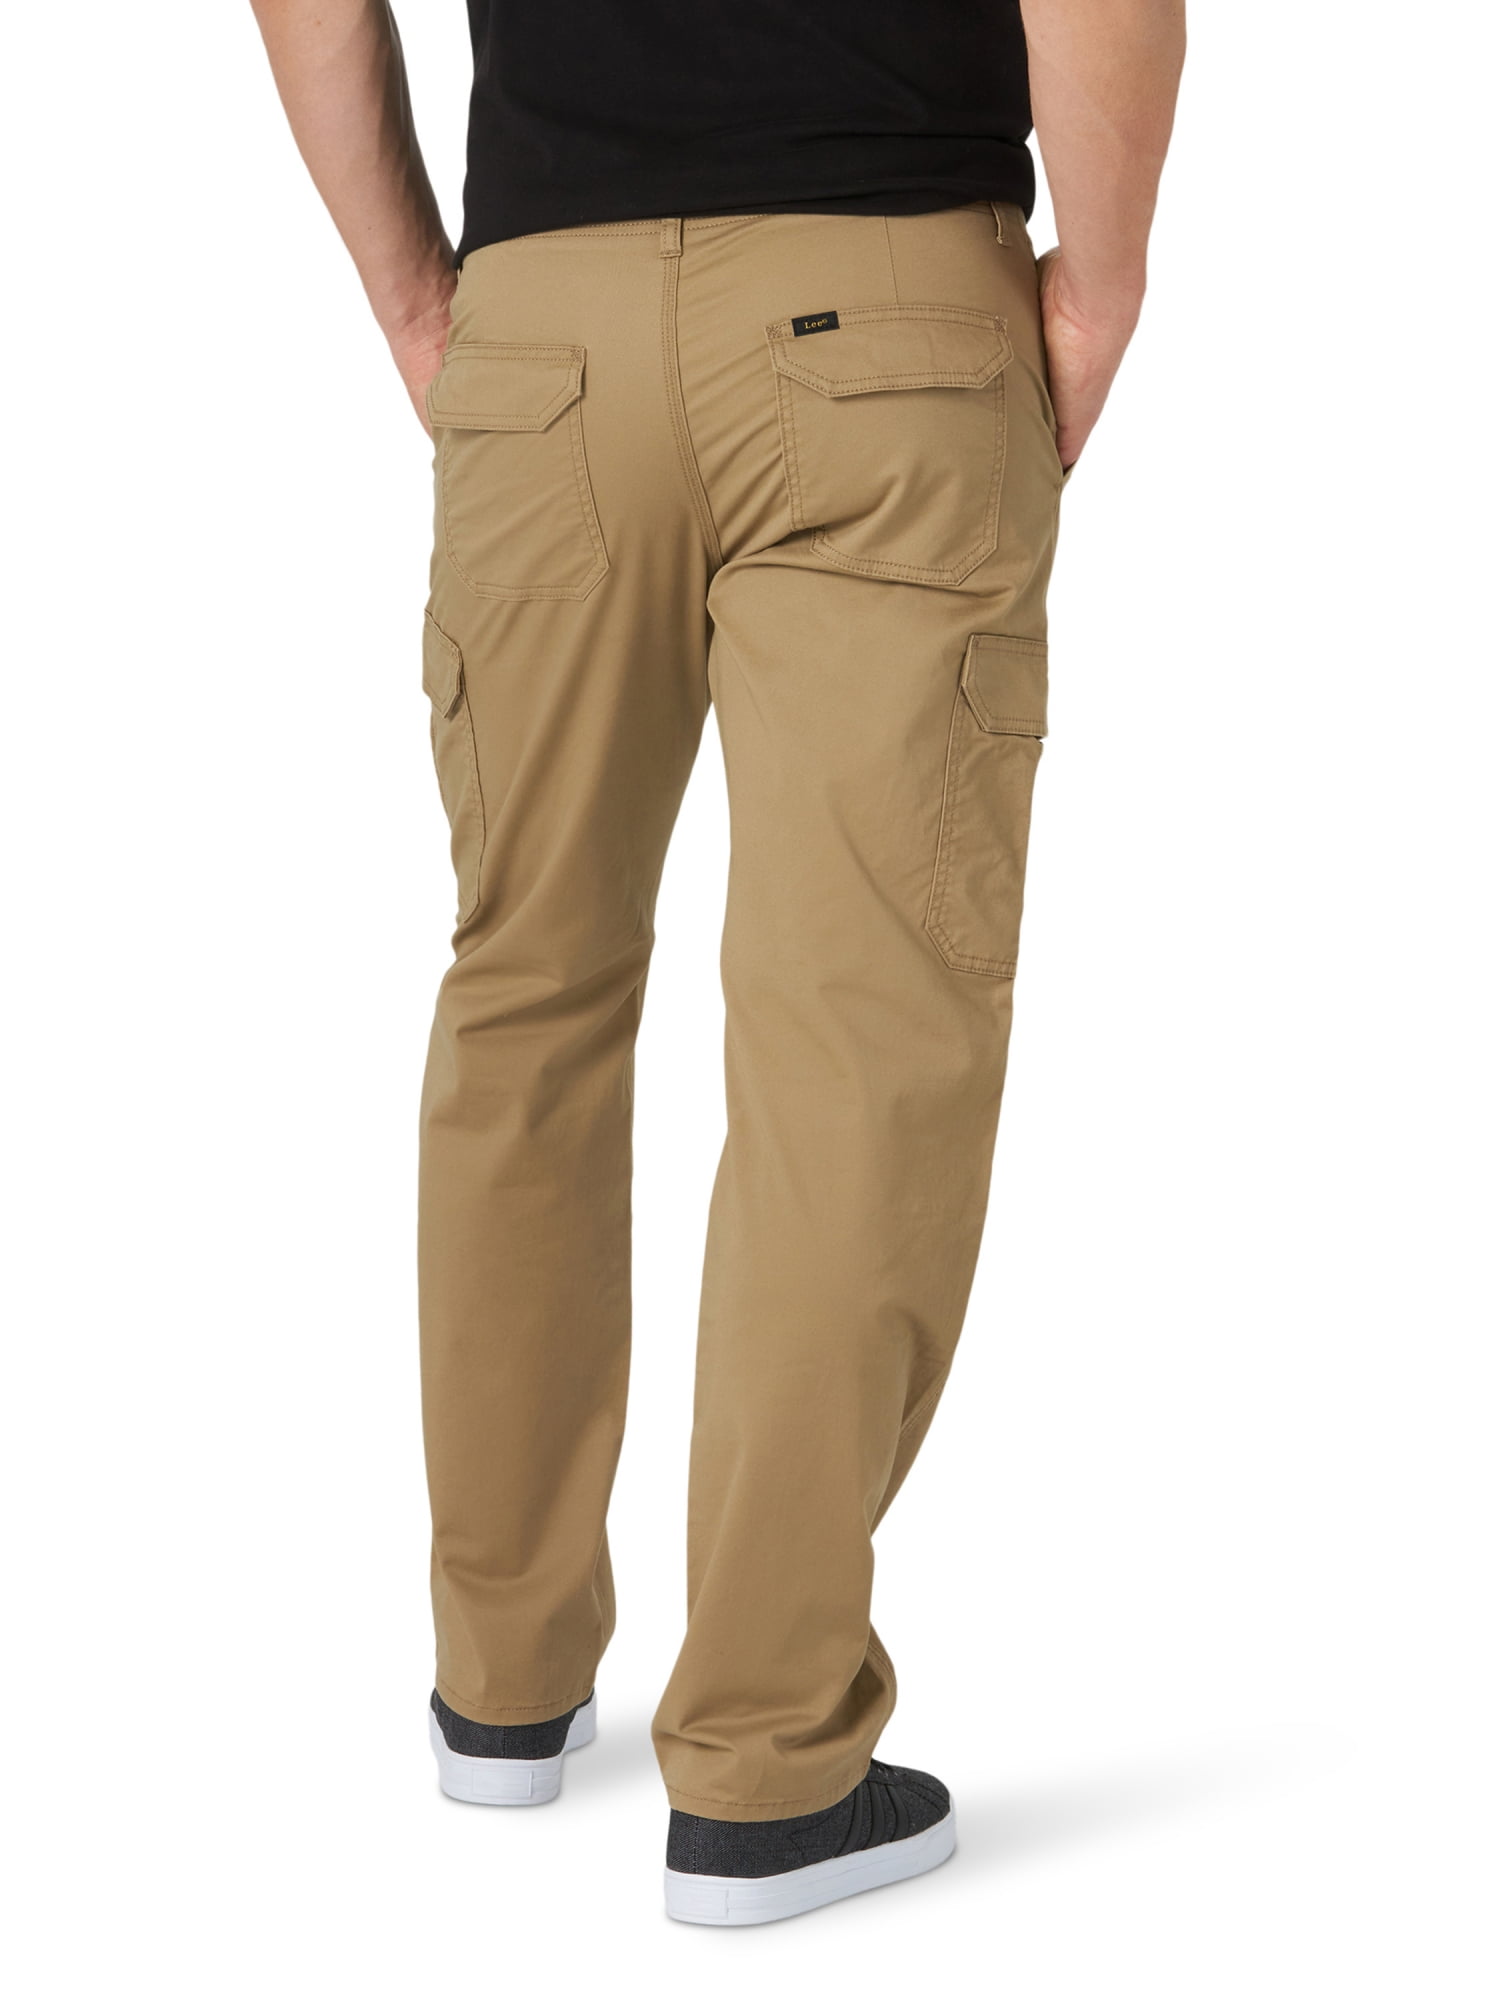 Lee Men's Extreme Comfort Cargo Twill Pant Straight Fit 